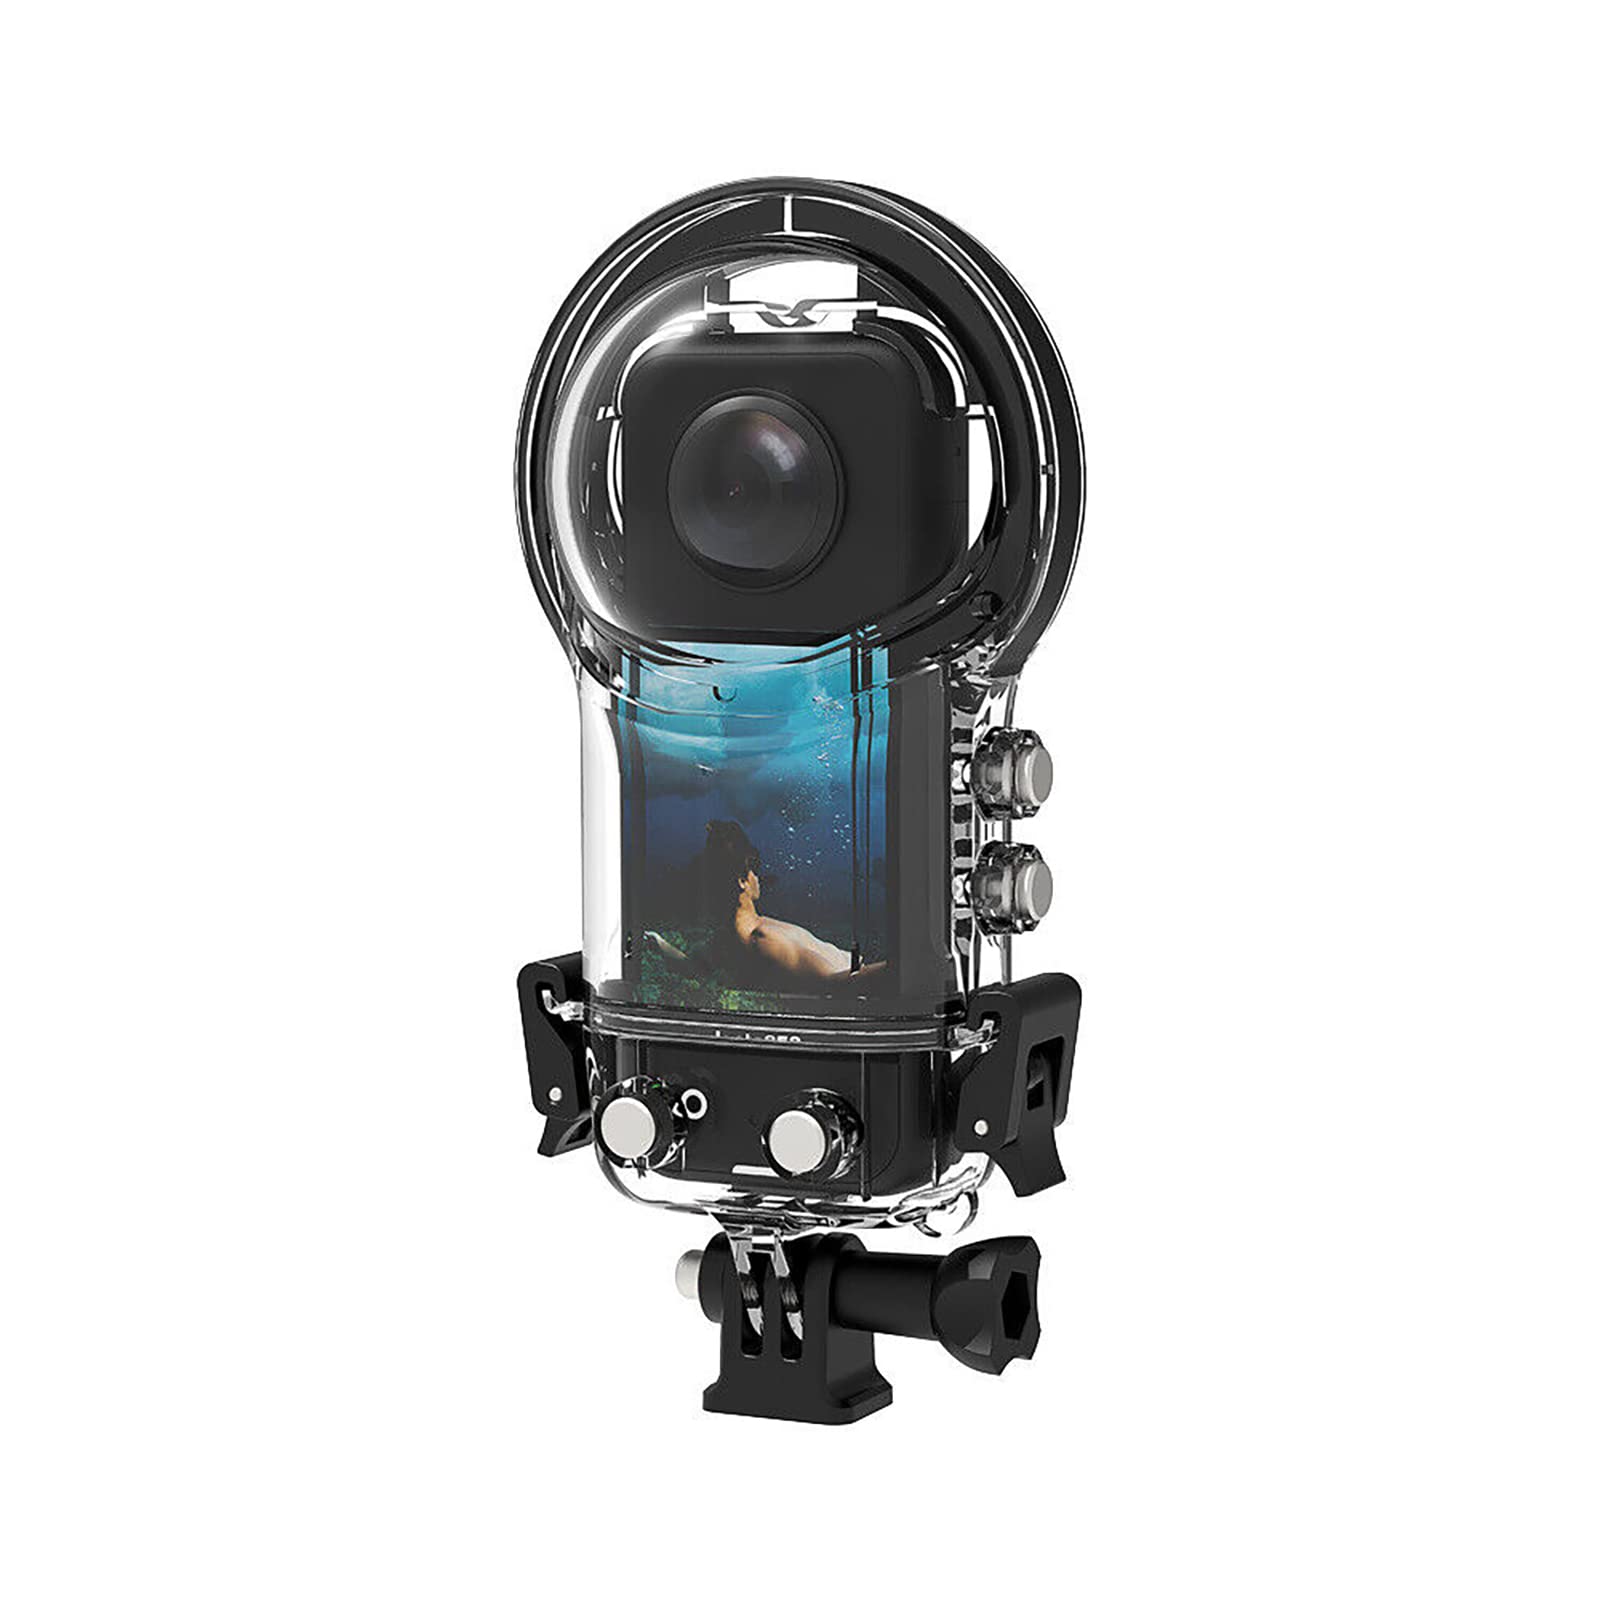 HUAYUWA 30M Dive Case with Silicon Lens Cap for Insta360 X3 Action Camera Waterproof Case with Bracket Accessories 98FT Underwater Photography Housing for Insta 360 One X3 Diving Case